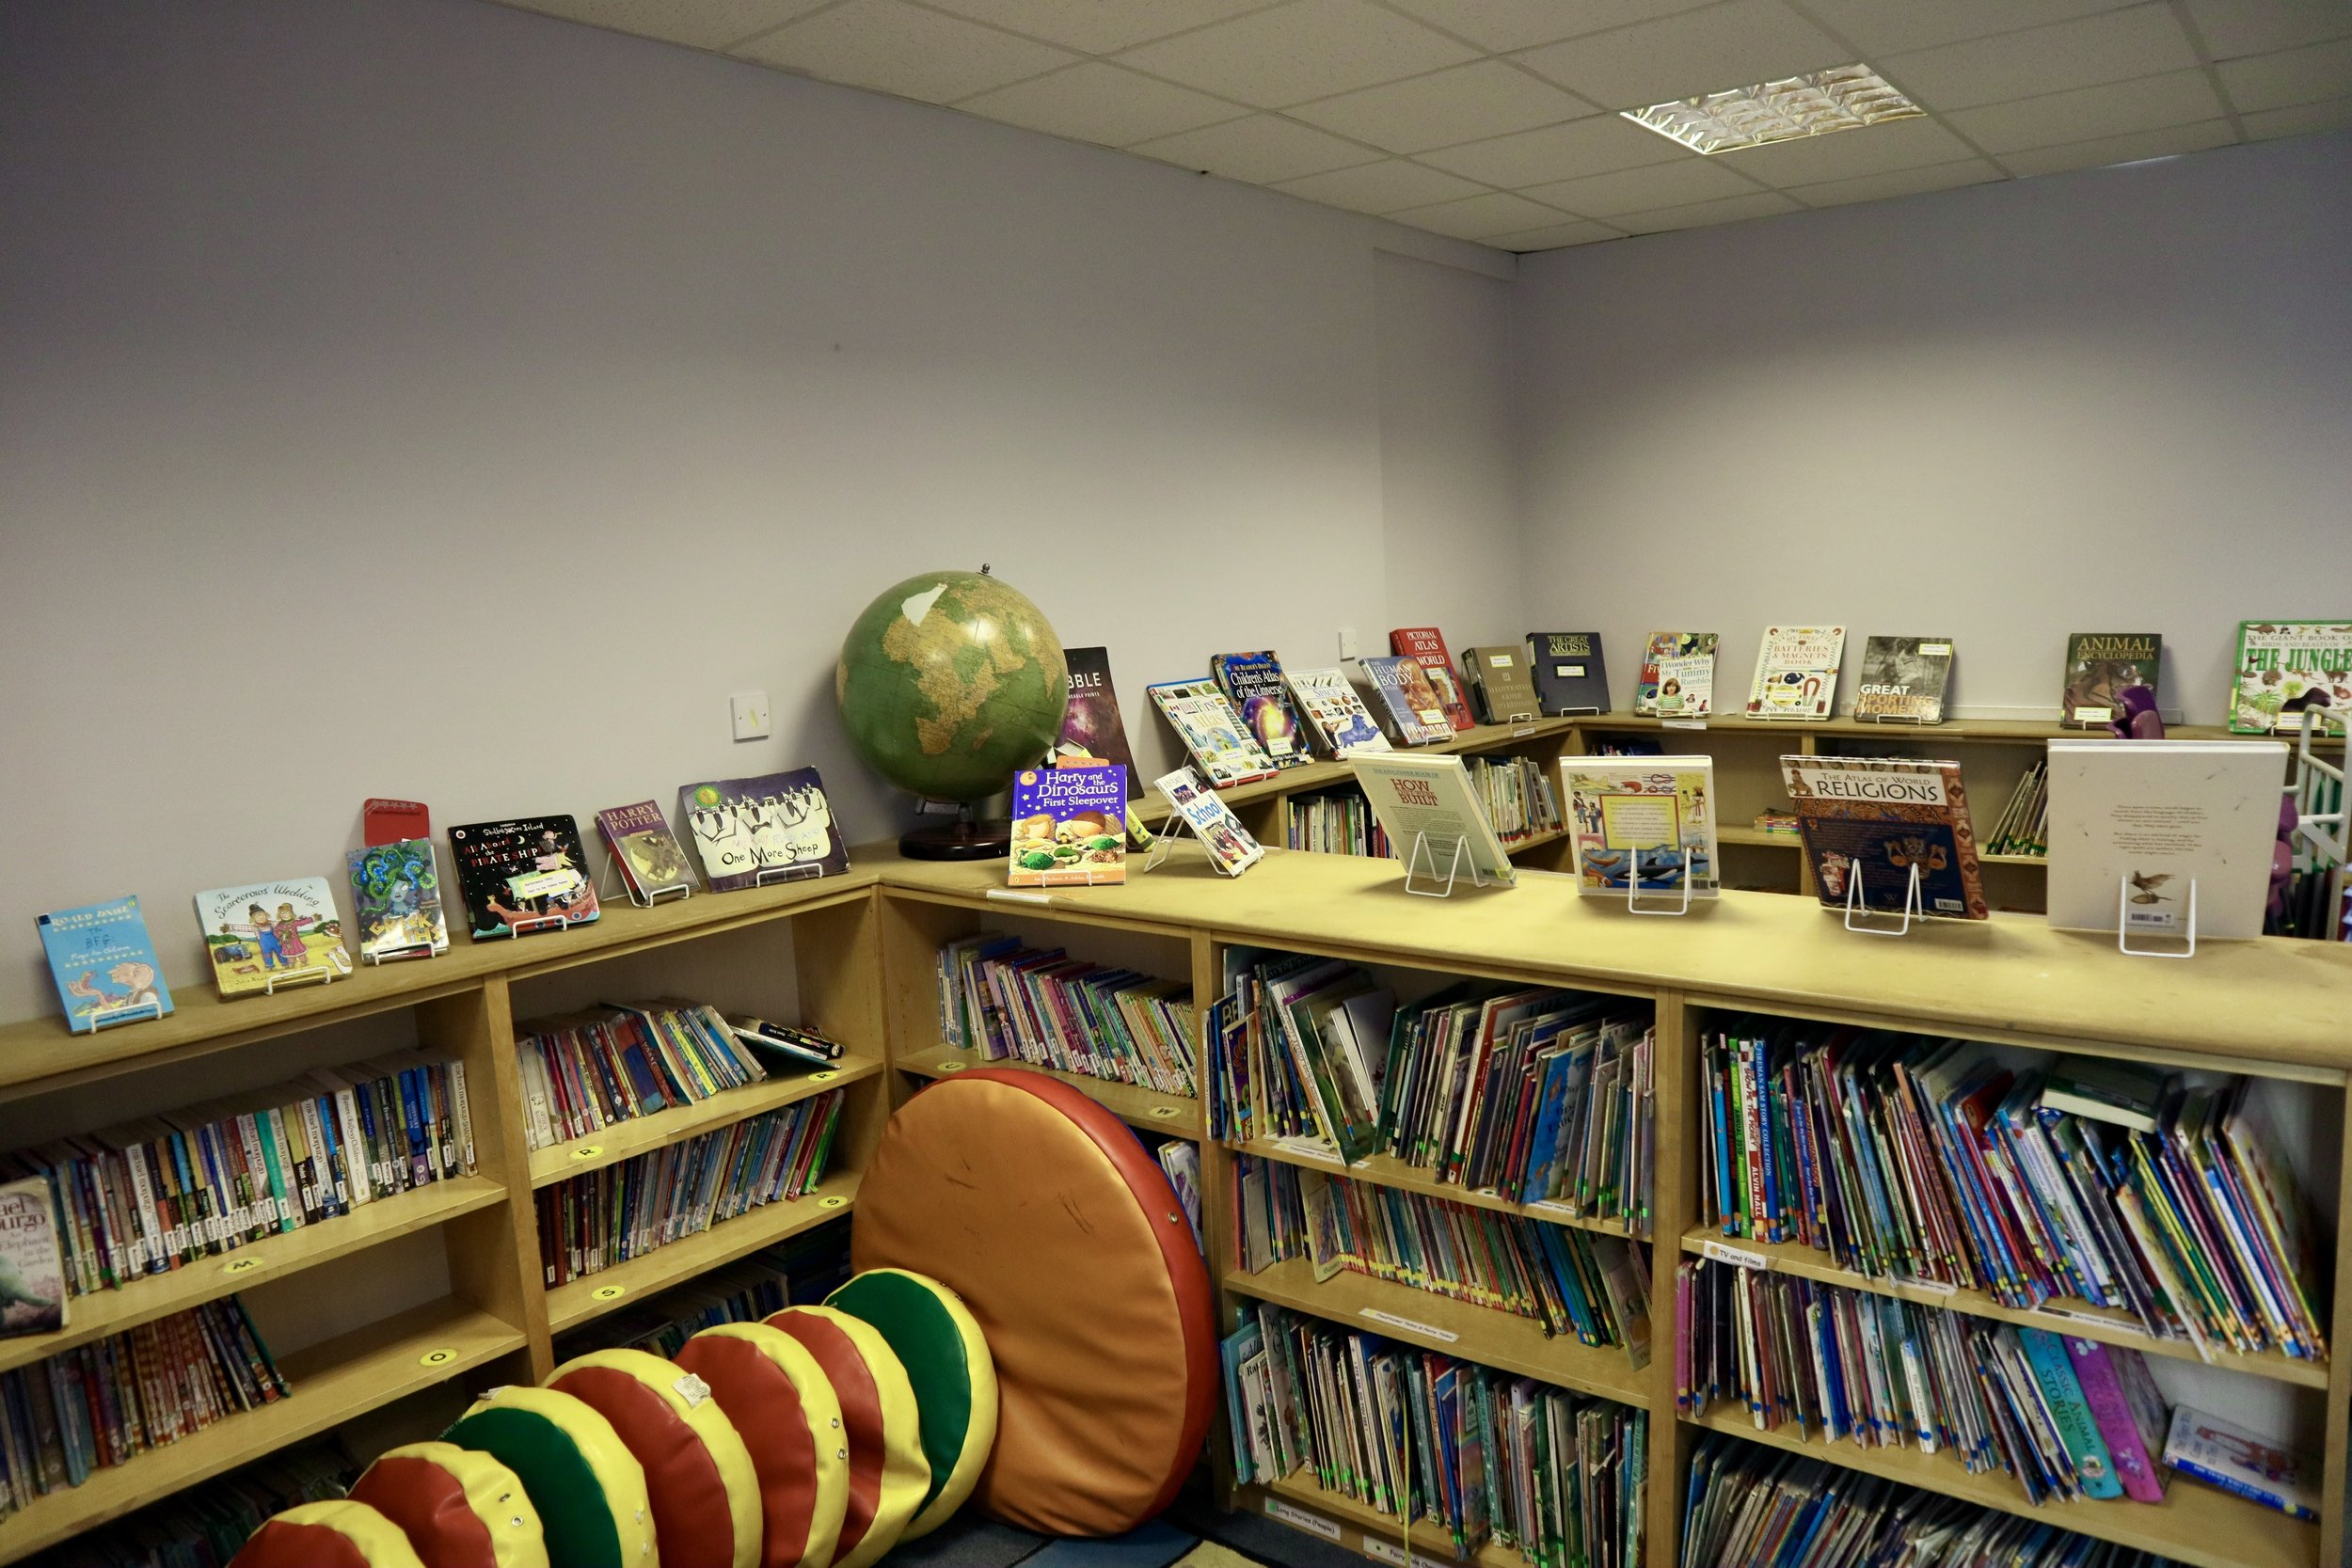 The school library